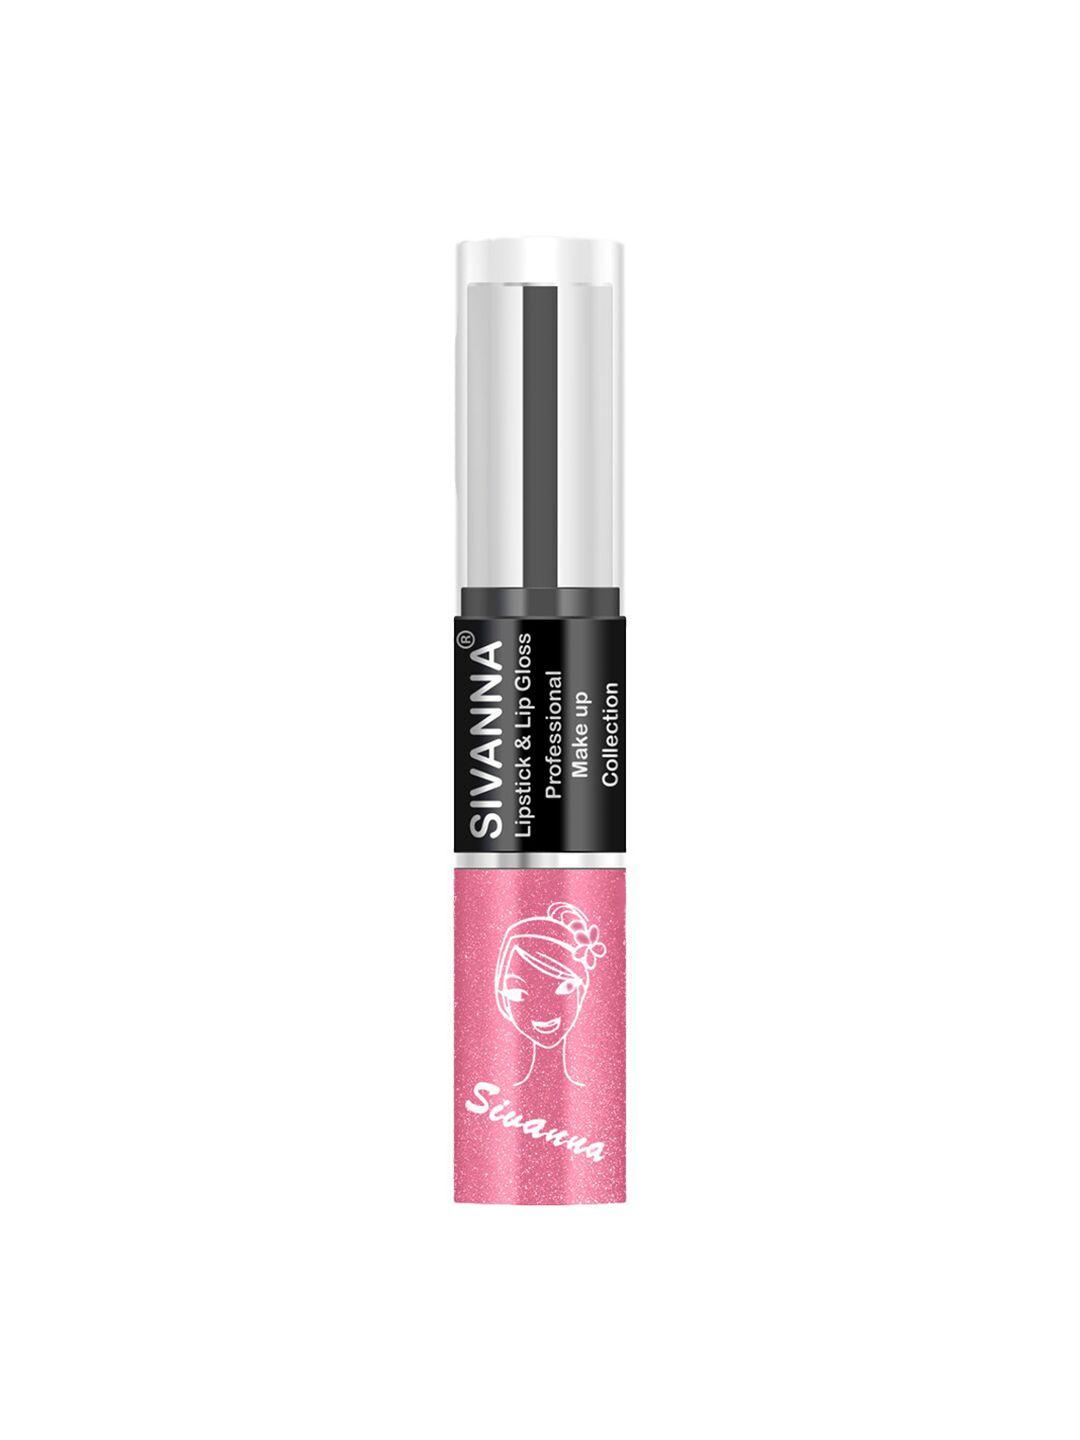 sivanna colors professional makeup collection 2 in 1 lipstick & lip gloss - dk061 25